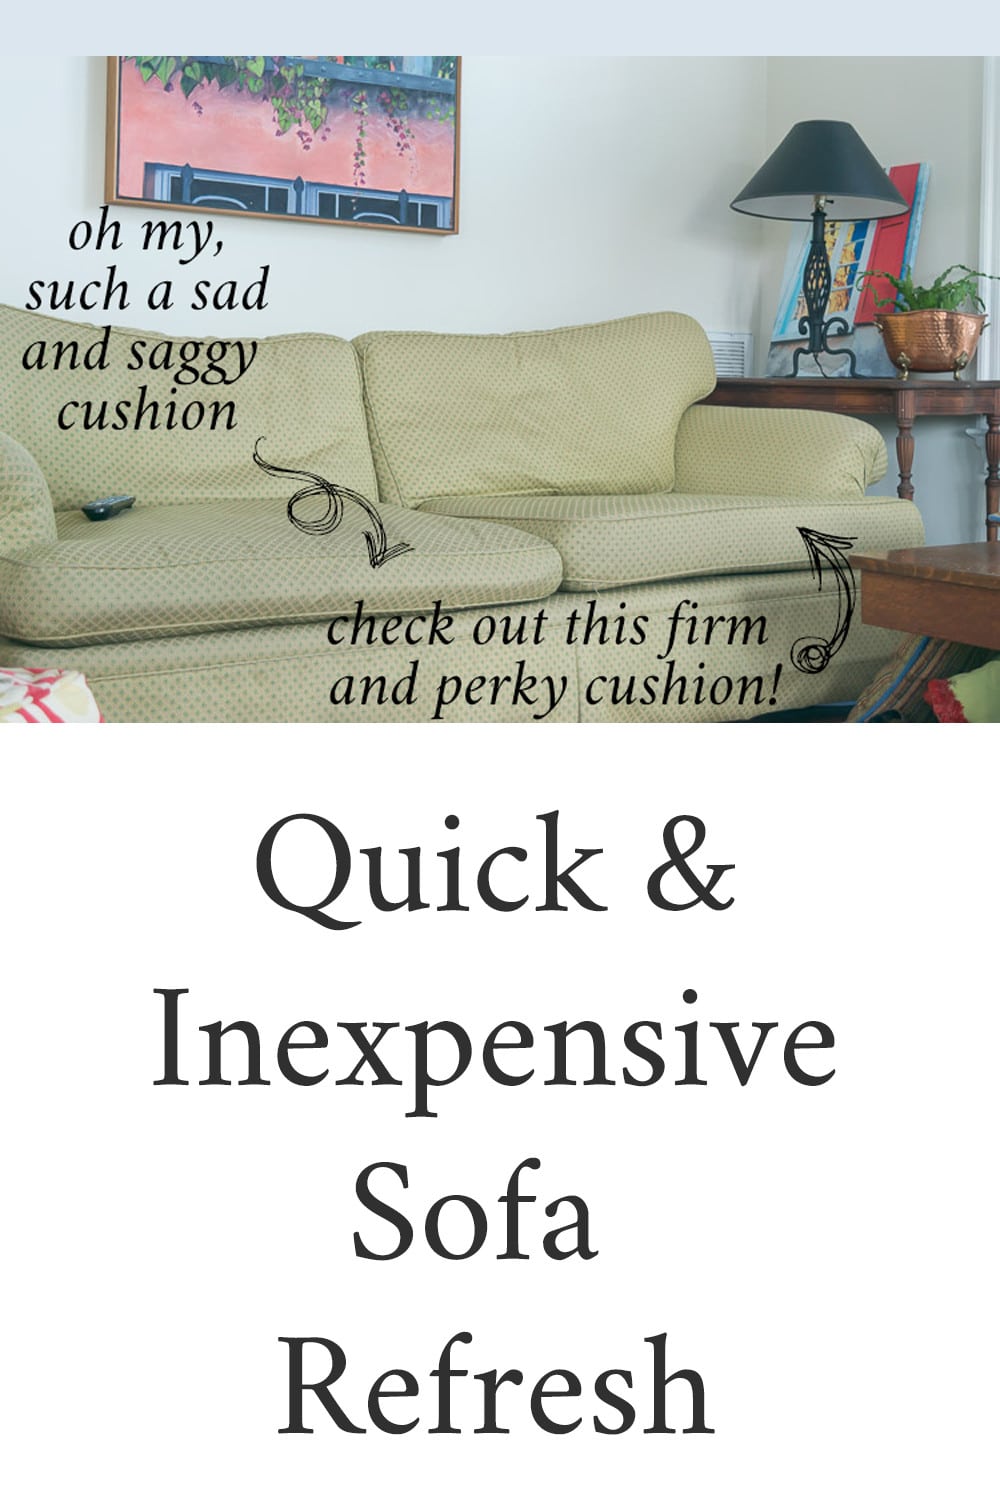 pin showing side by side comparison of sofa during inexpensive sofa refresh